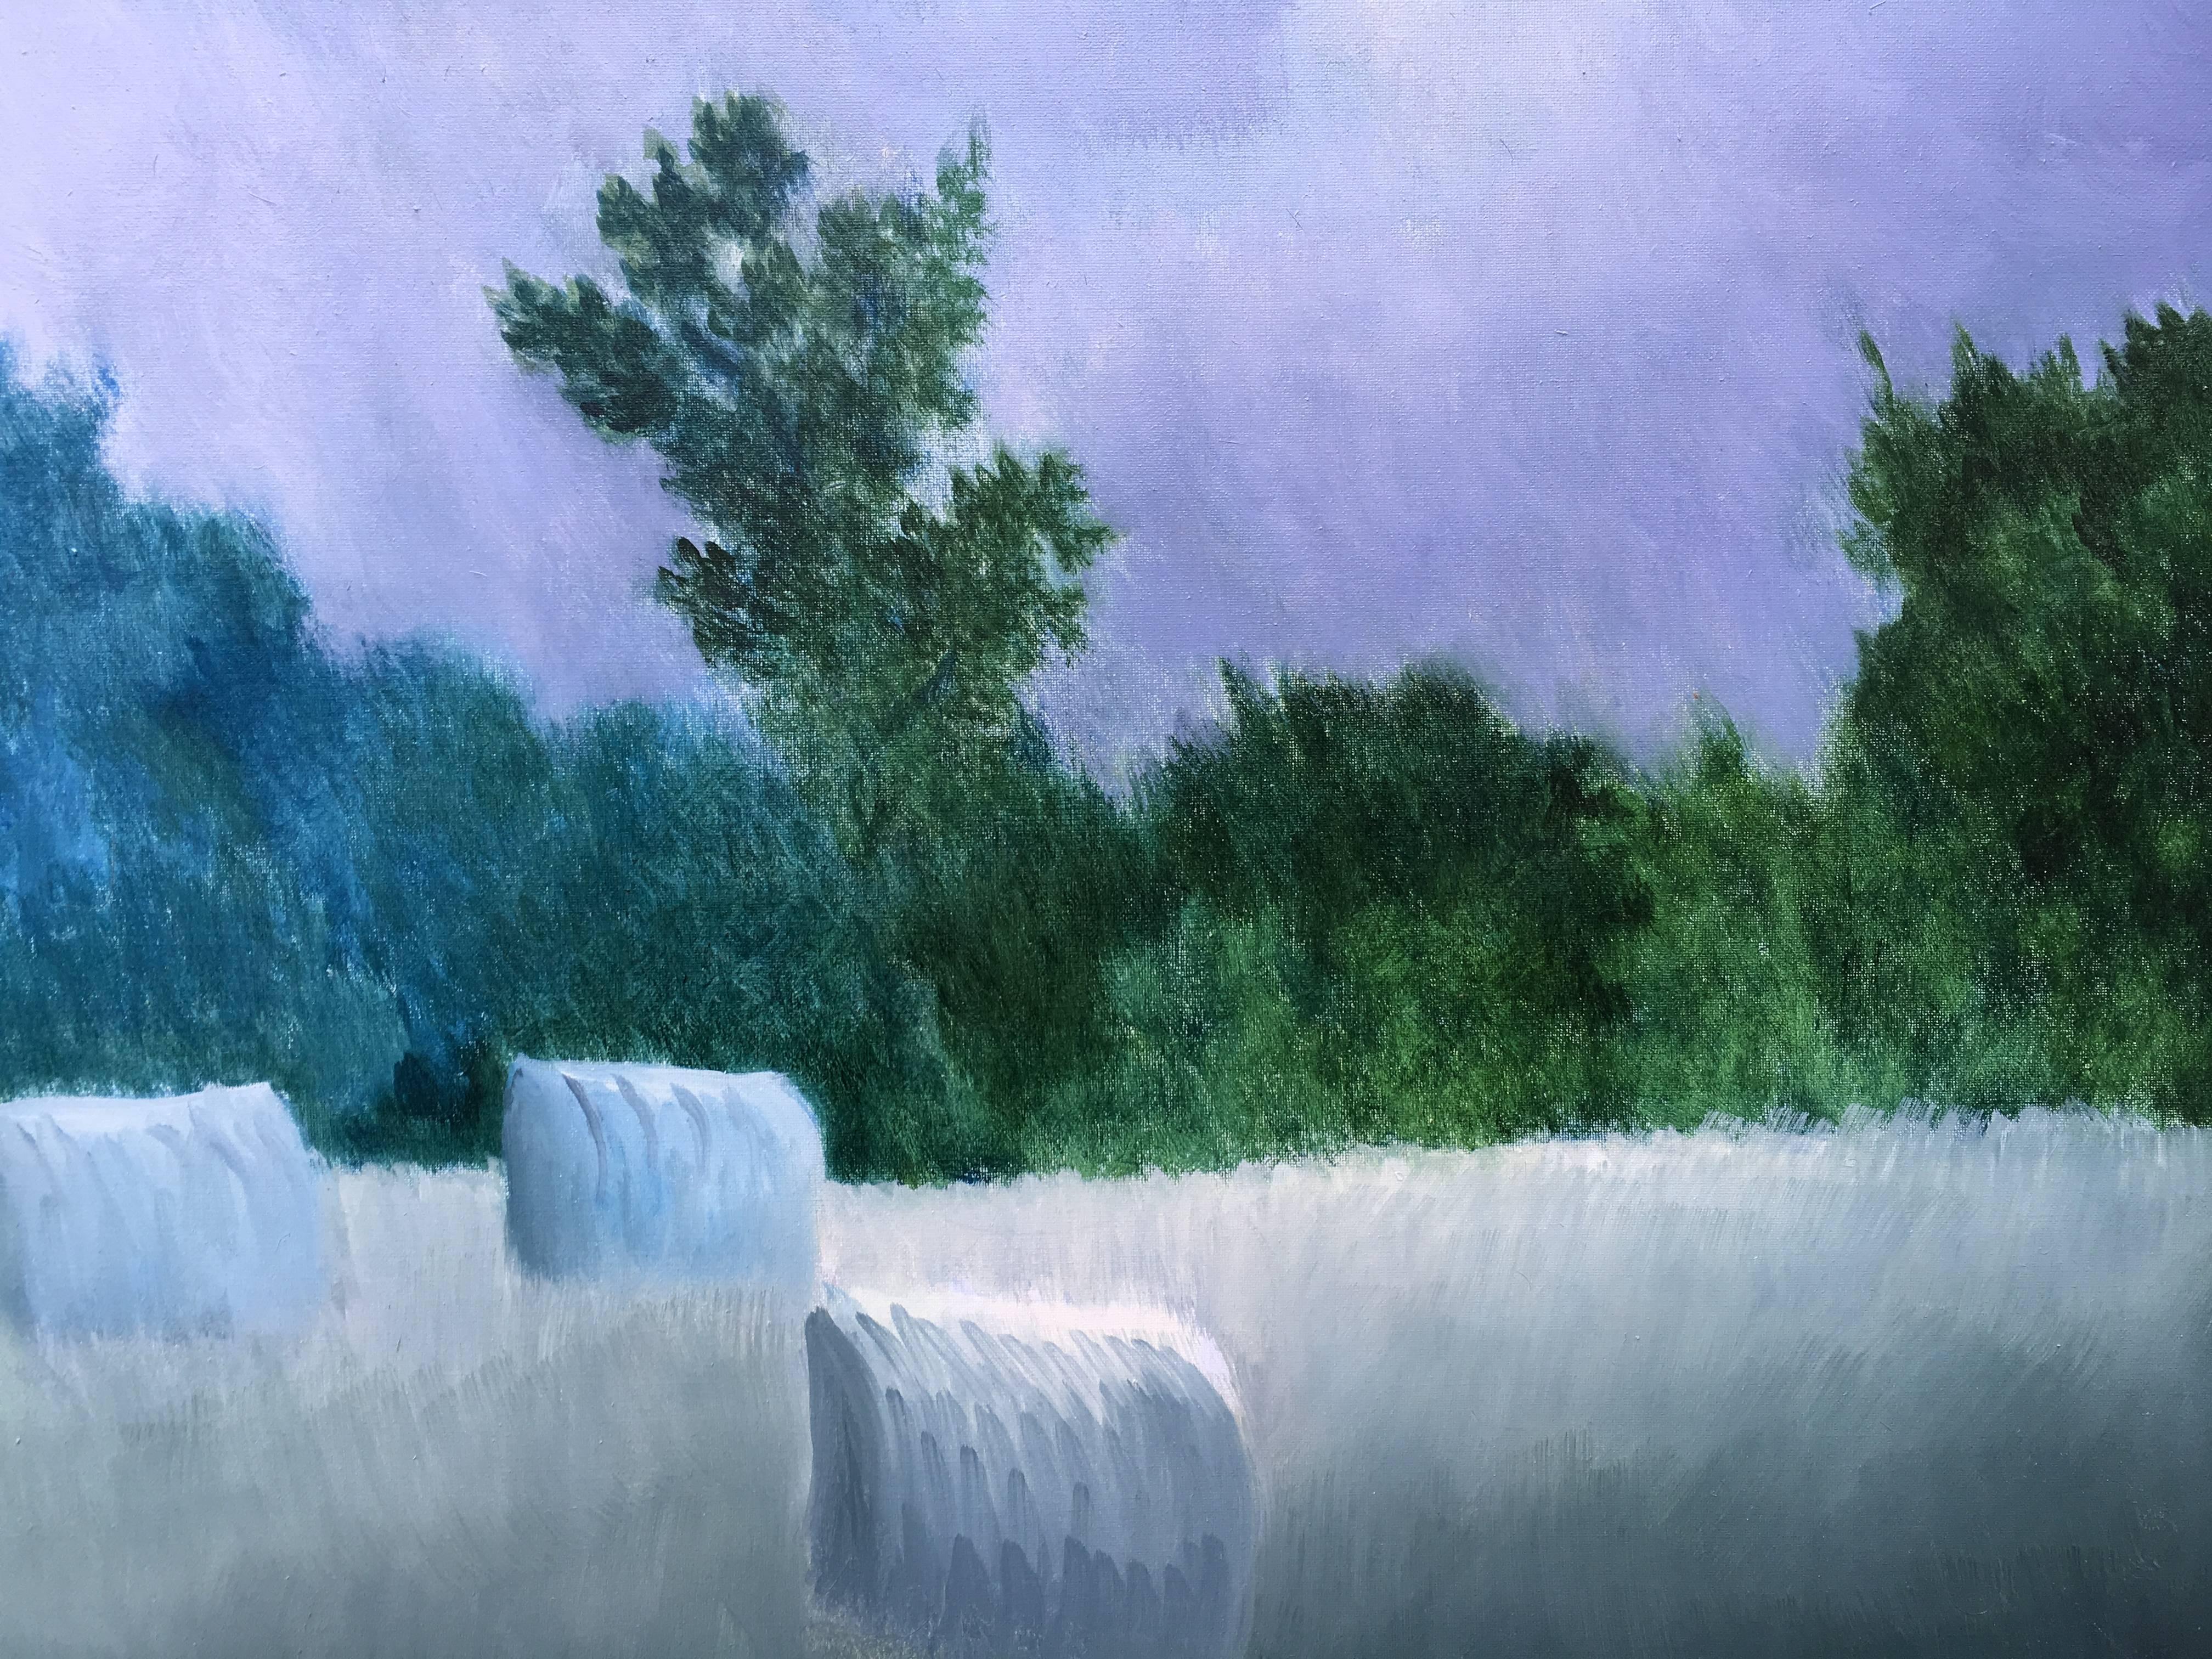 The three wheat bales – Painting von Sheila Querre